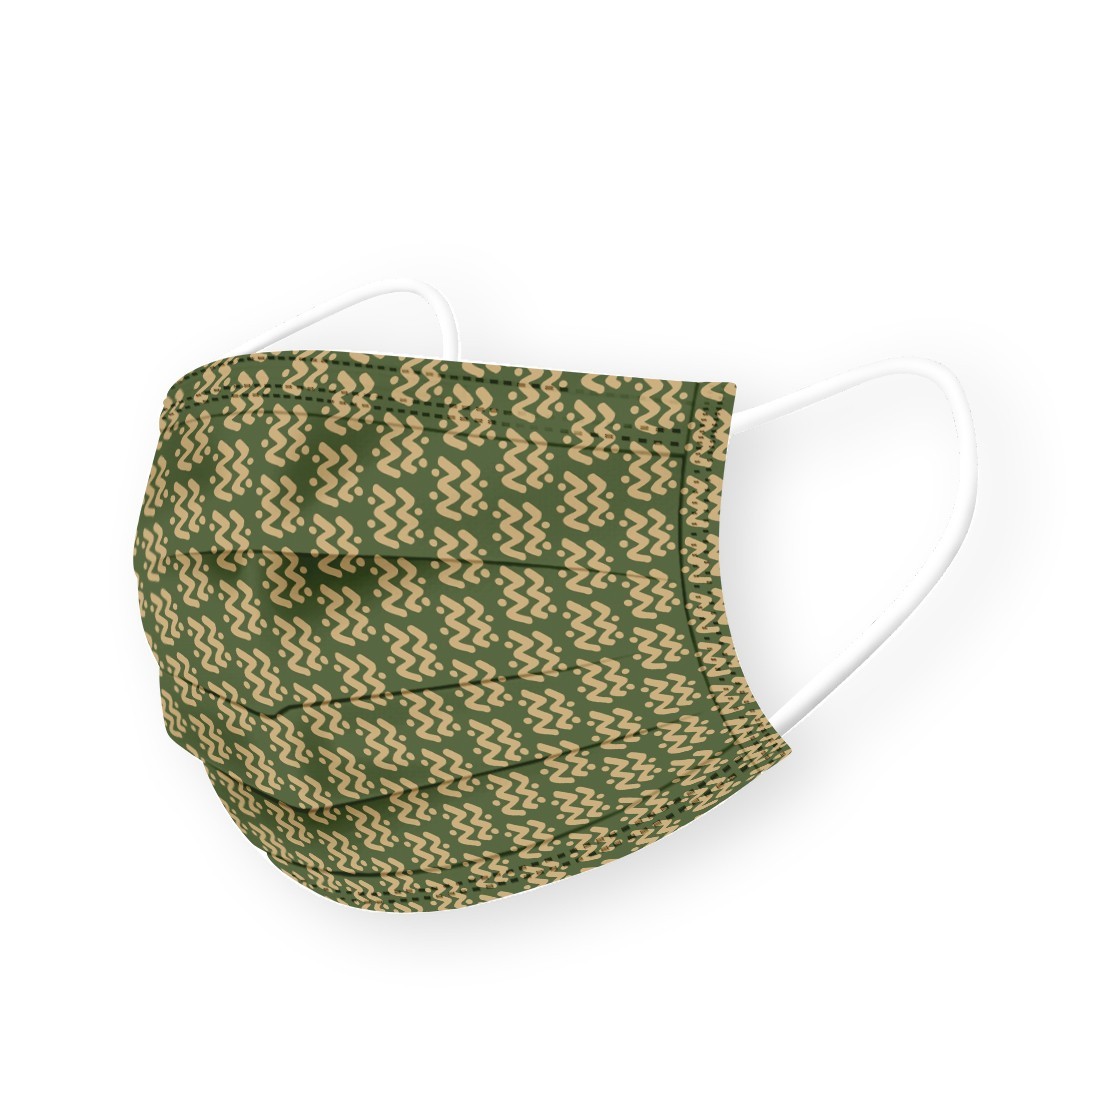  Mask Disposable For Adult Wave Pattern Green